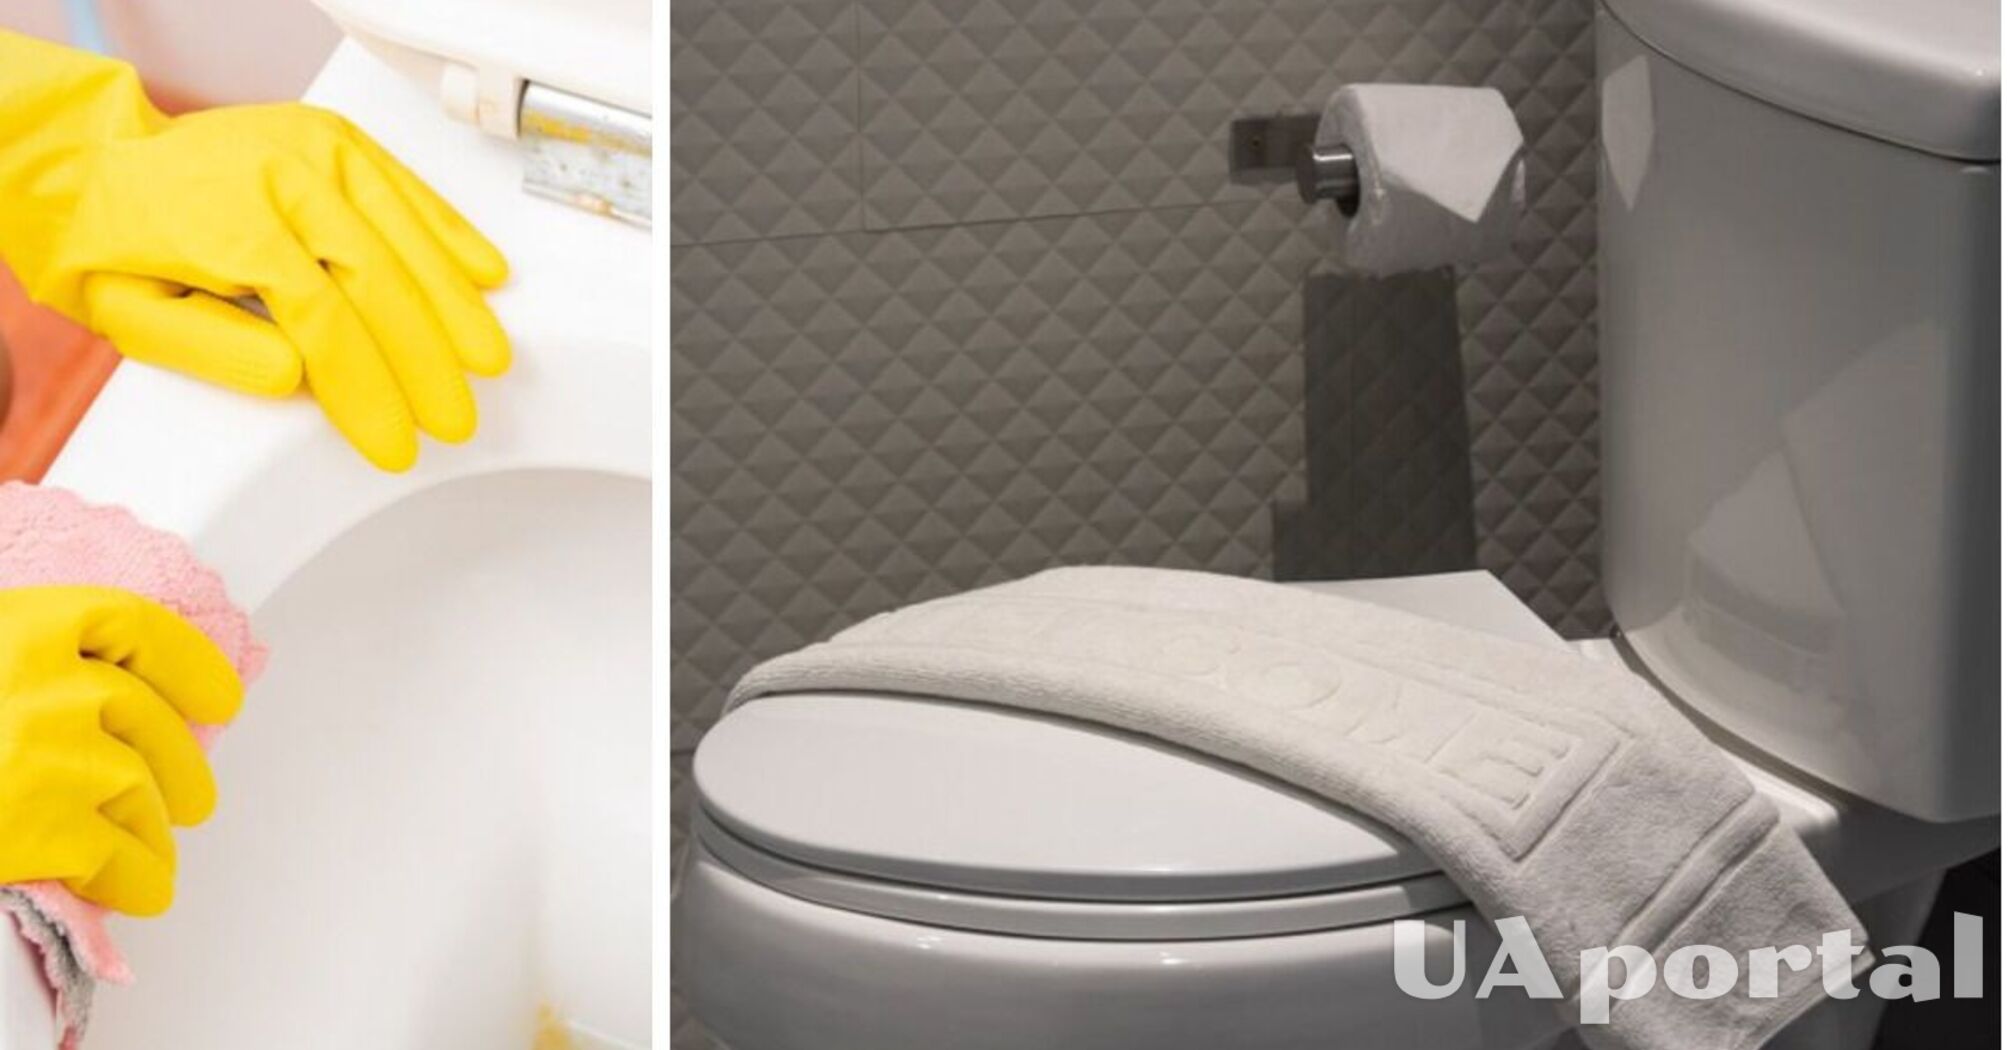 What 4 products will clean the toilet to perfect whiteness: a simple life hack